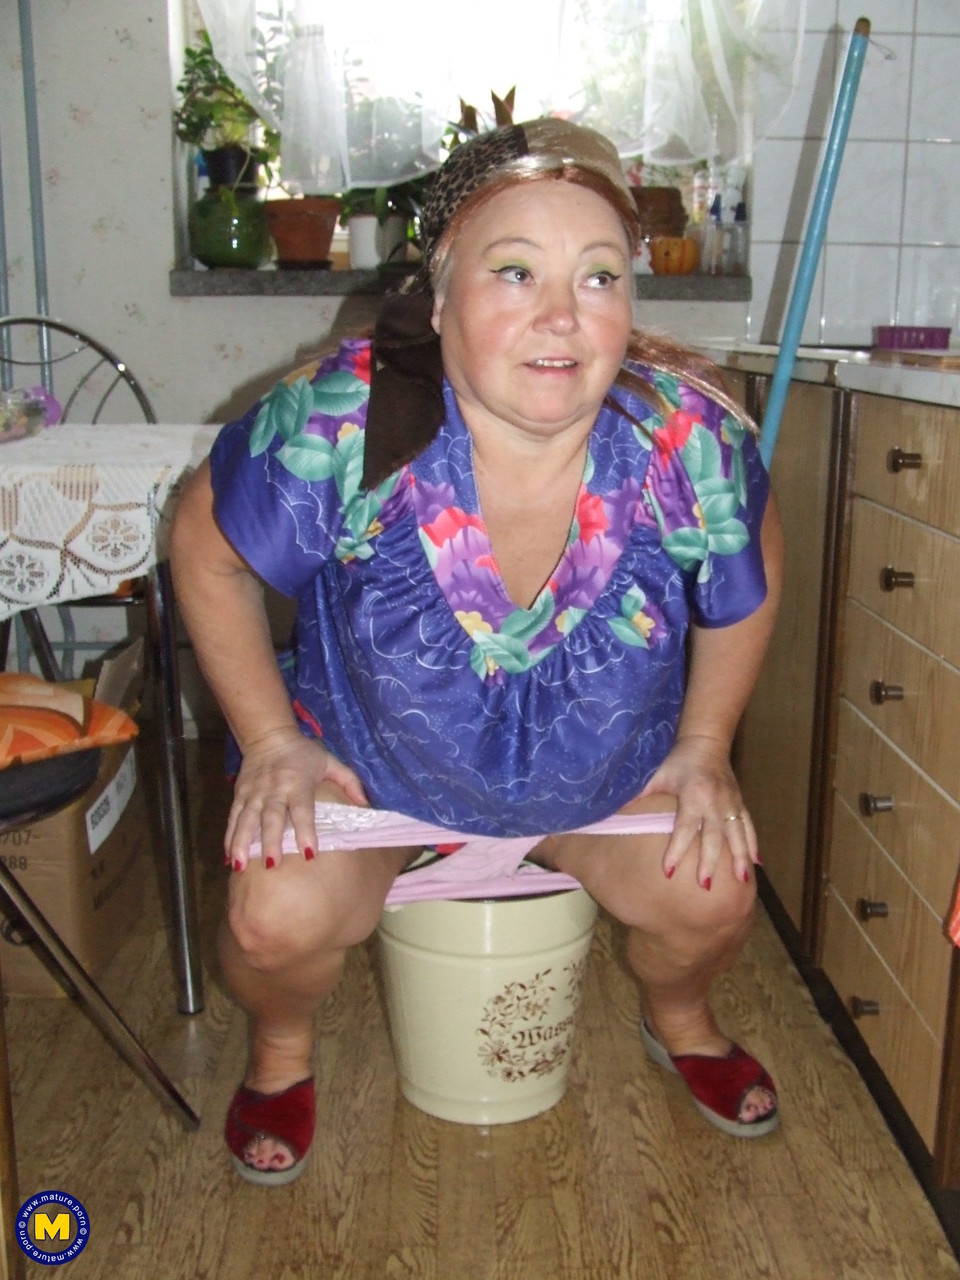 Fat granny Regina strips her clothes and poses while cleaning the kitchen photo porno #425872093